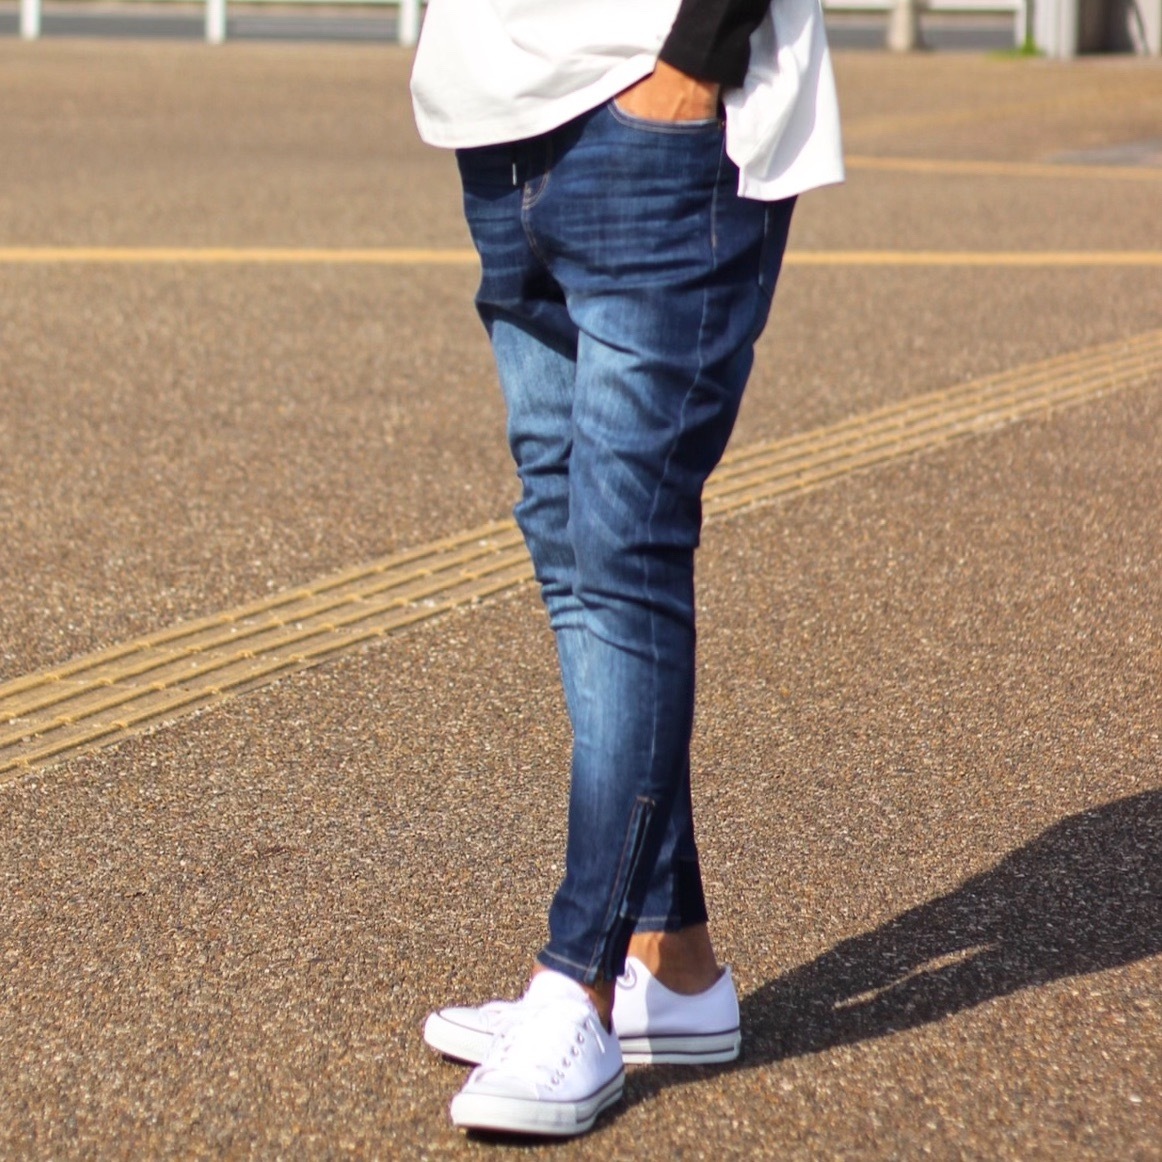 skinny jeans tapered